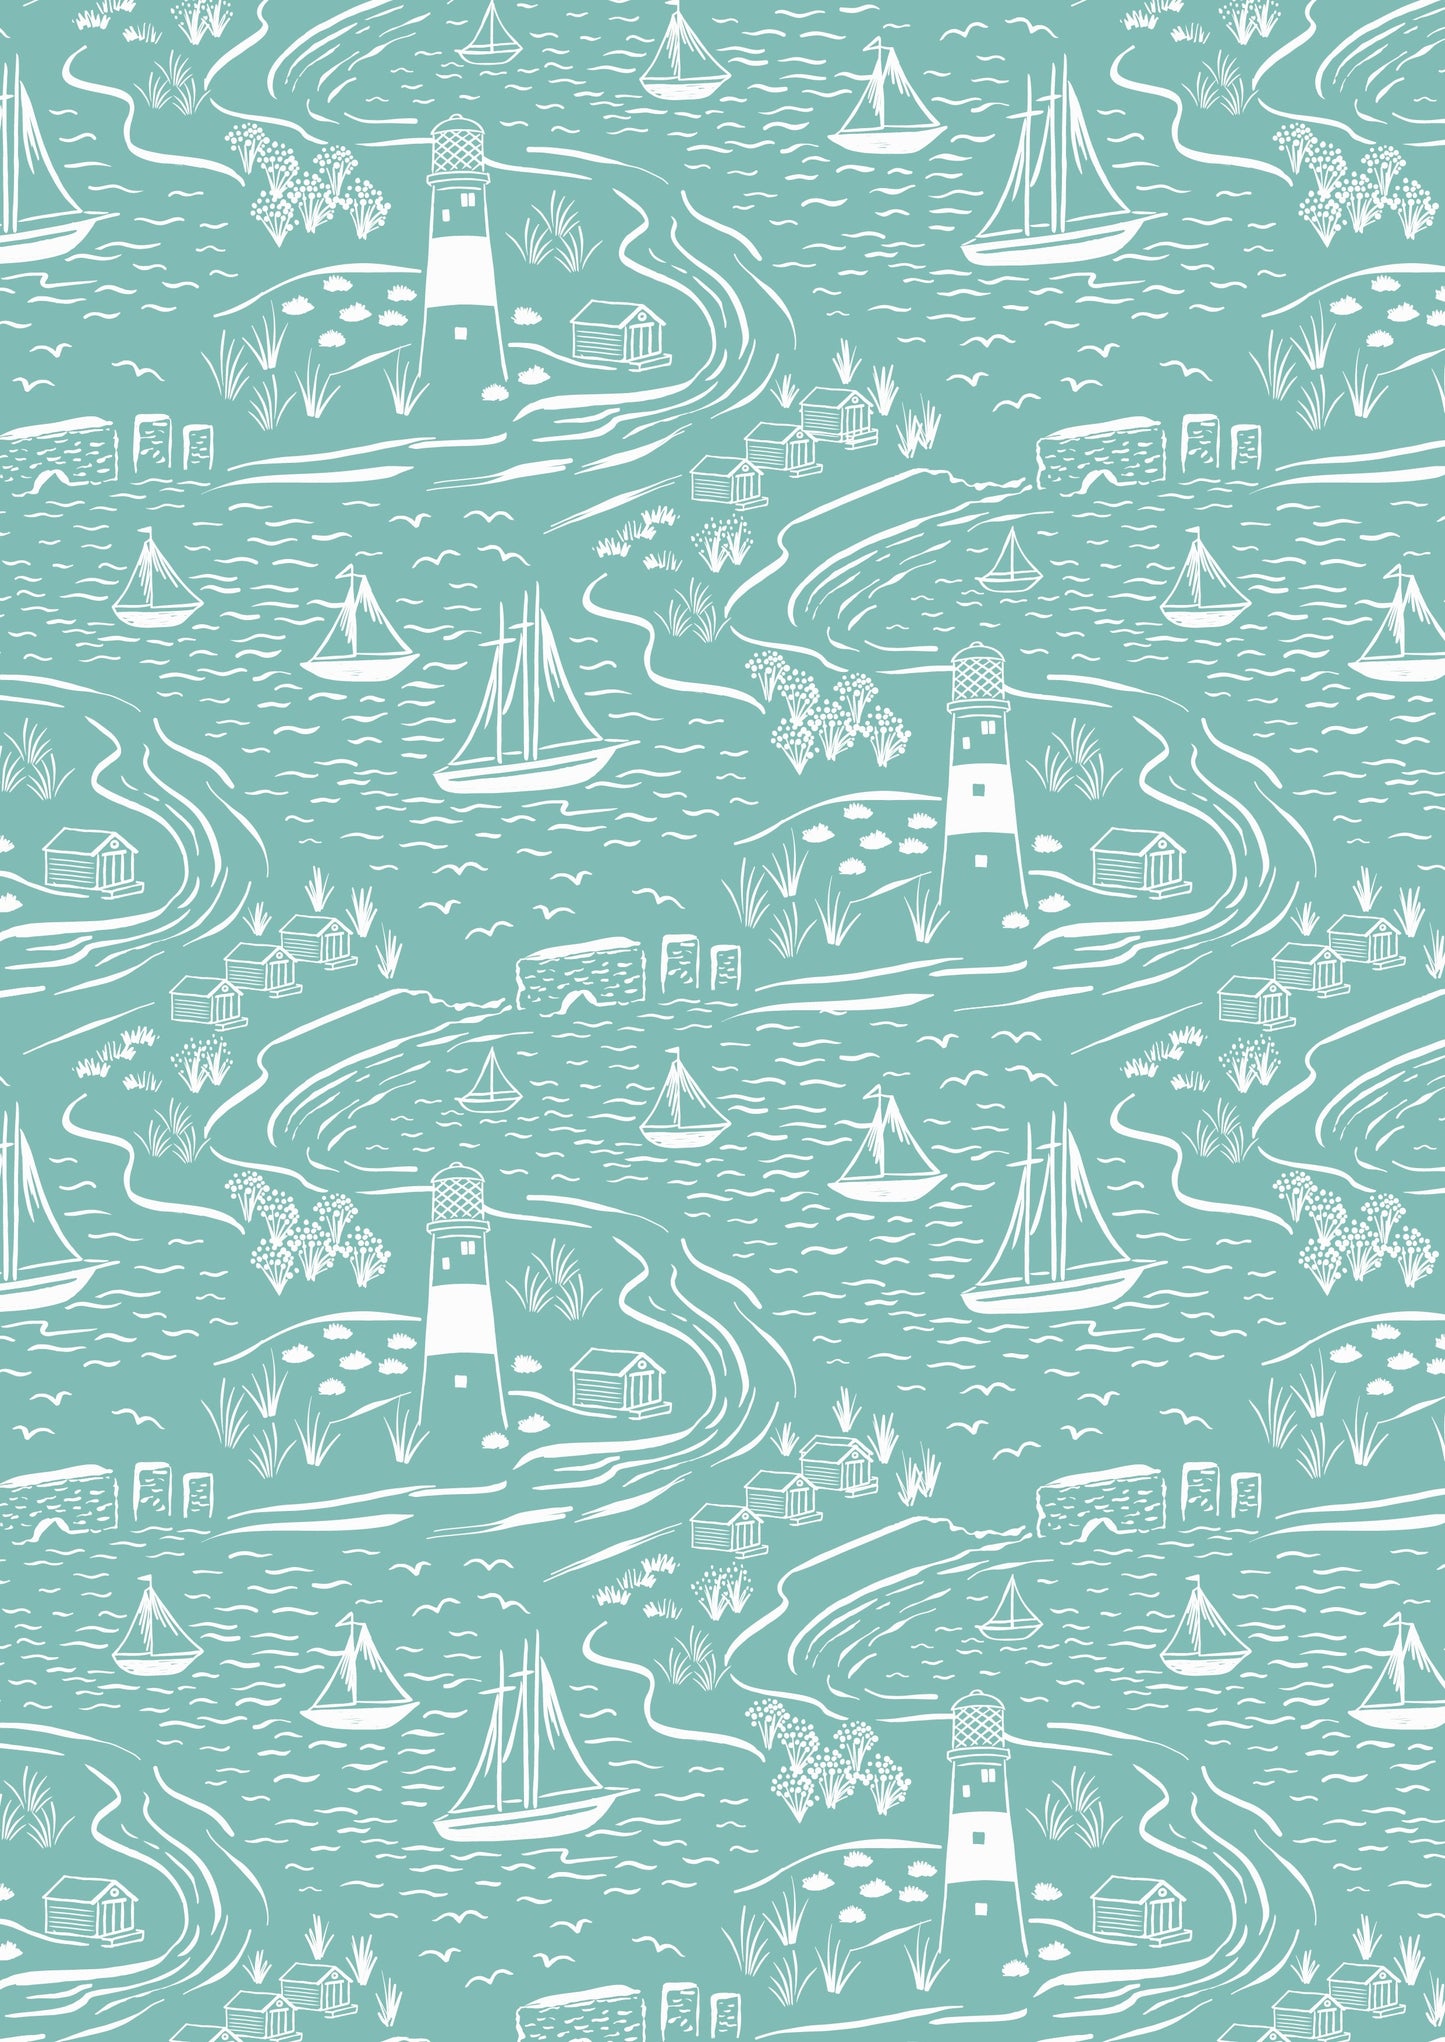 From Old Harry Rocks POS Fabric - Trapunto